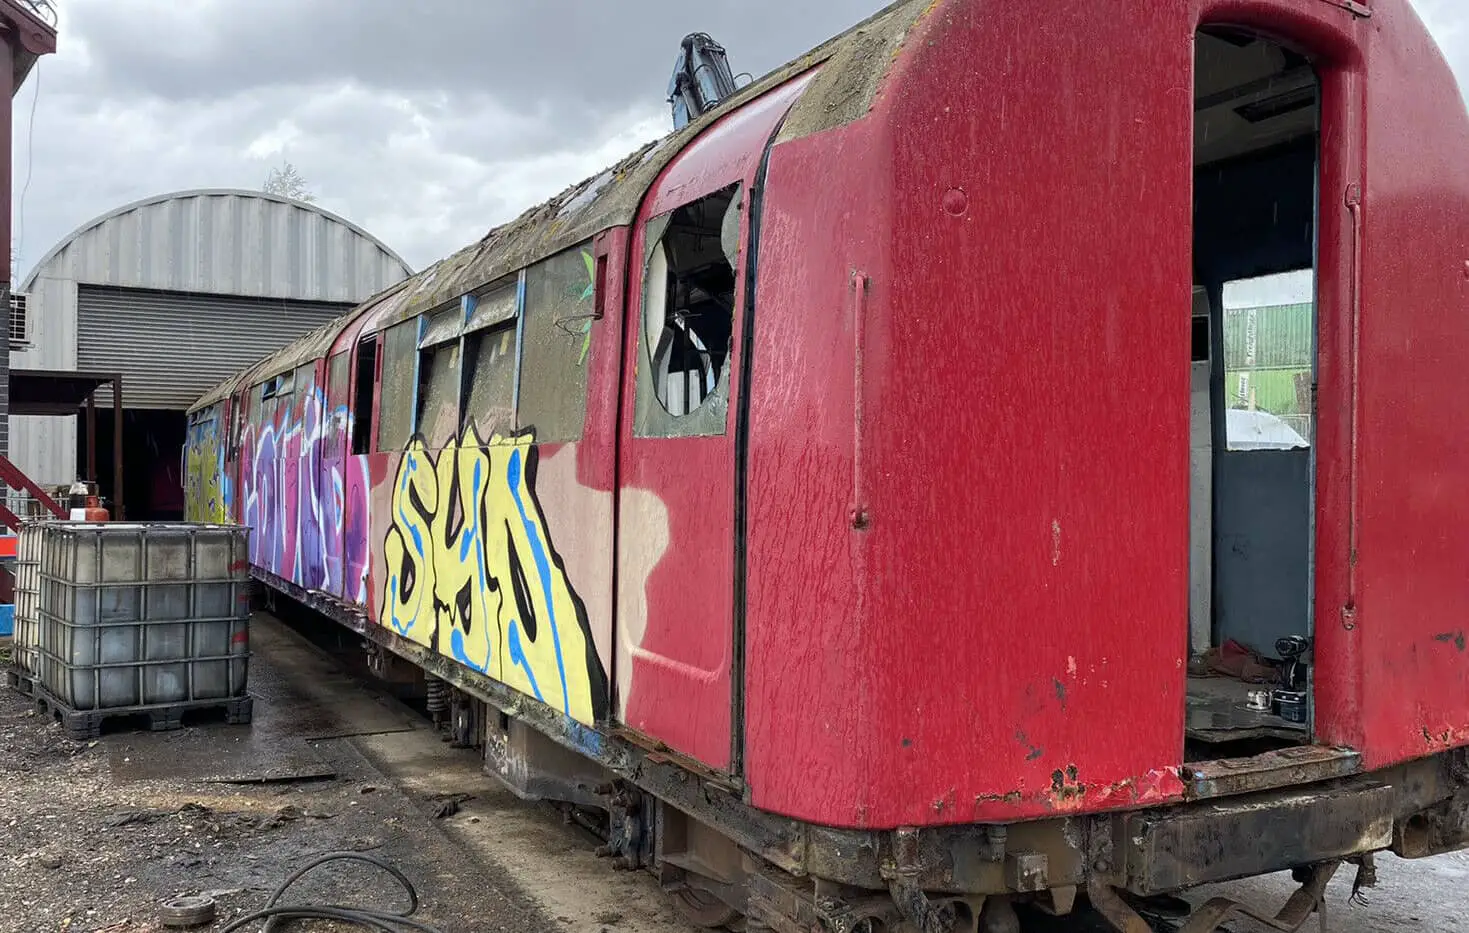 Car 225 from Class 483002 - side view with graffiti